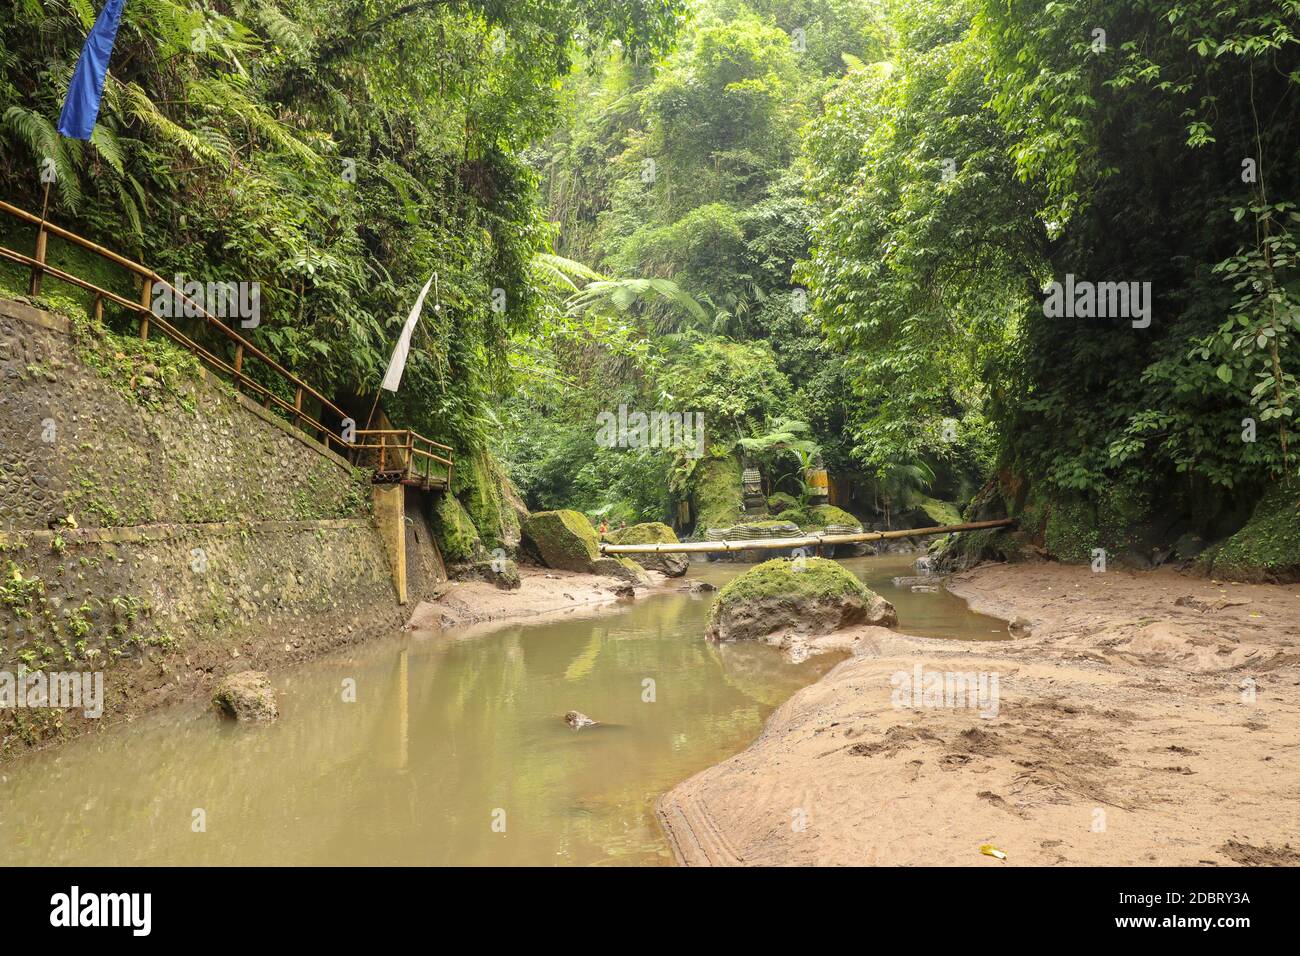 Bridge over river in the balinese jungle, Indonesia. Stock Photo